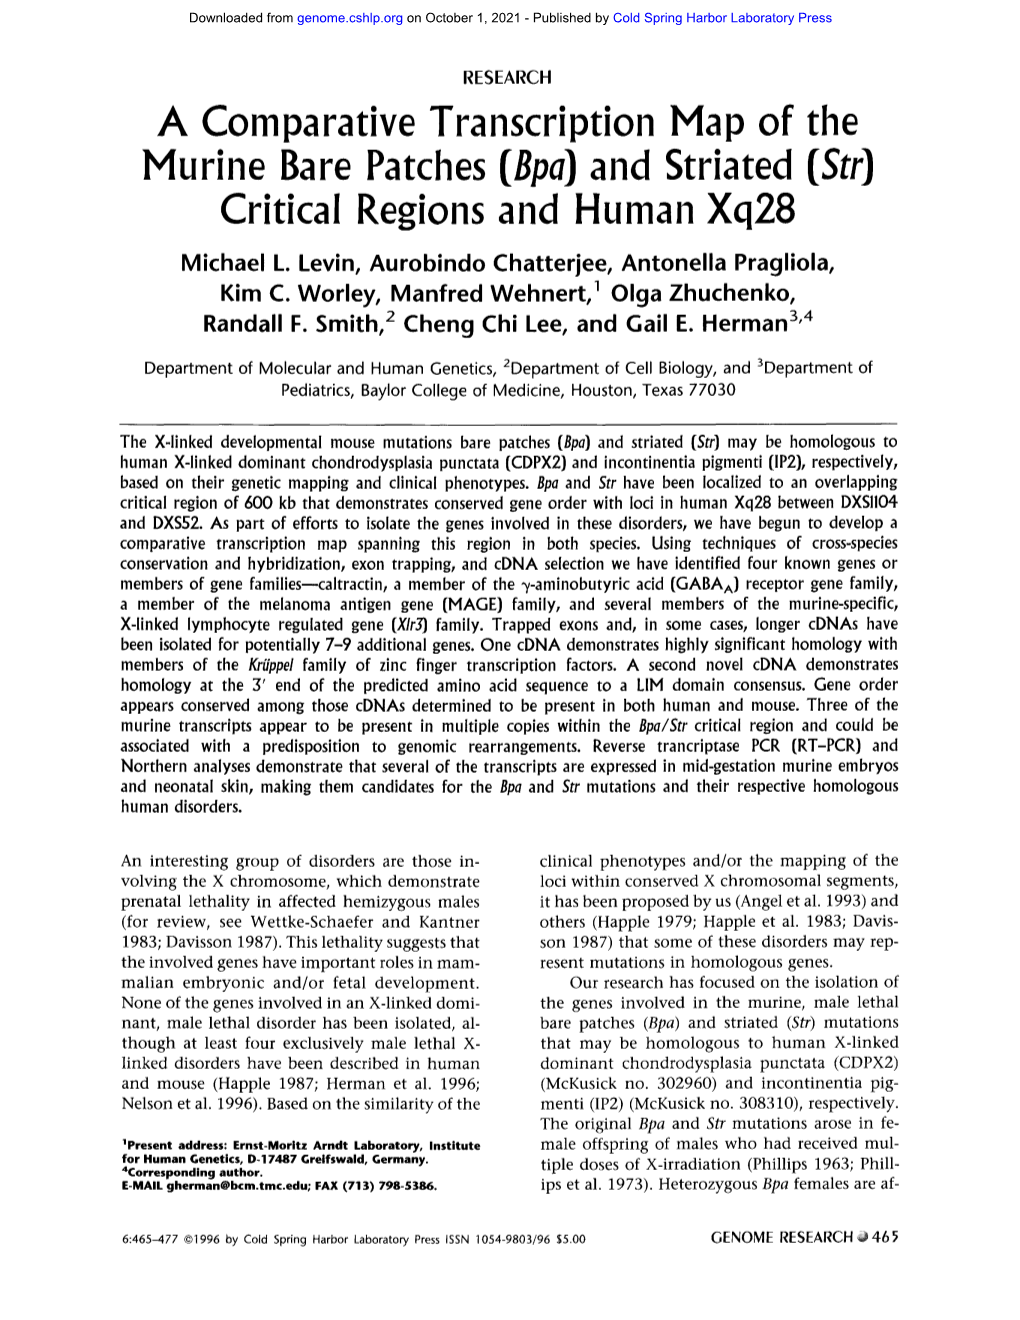 A Comparative Transcription Map of the Murine Bare Patches (Bpa) and Striated (Str) Critical Regions and Human Xq28 Michael L